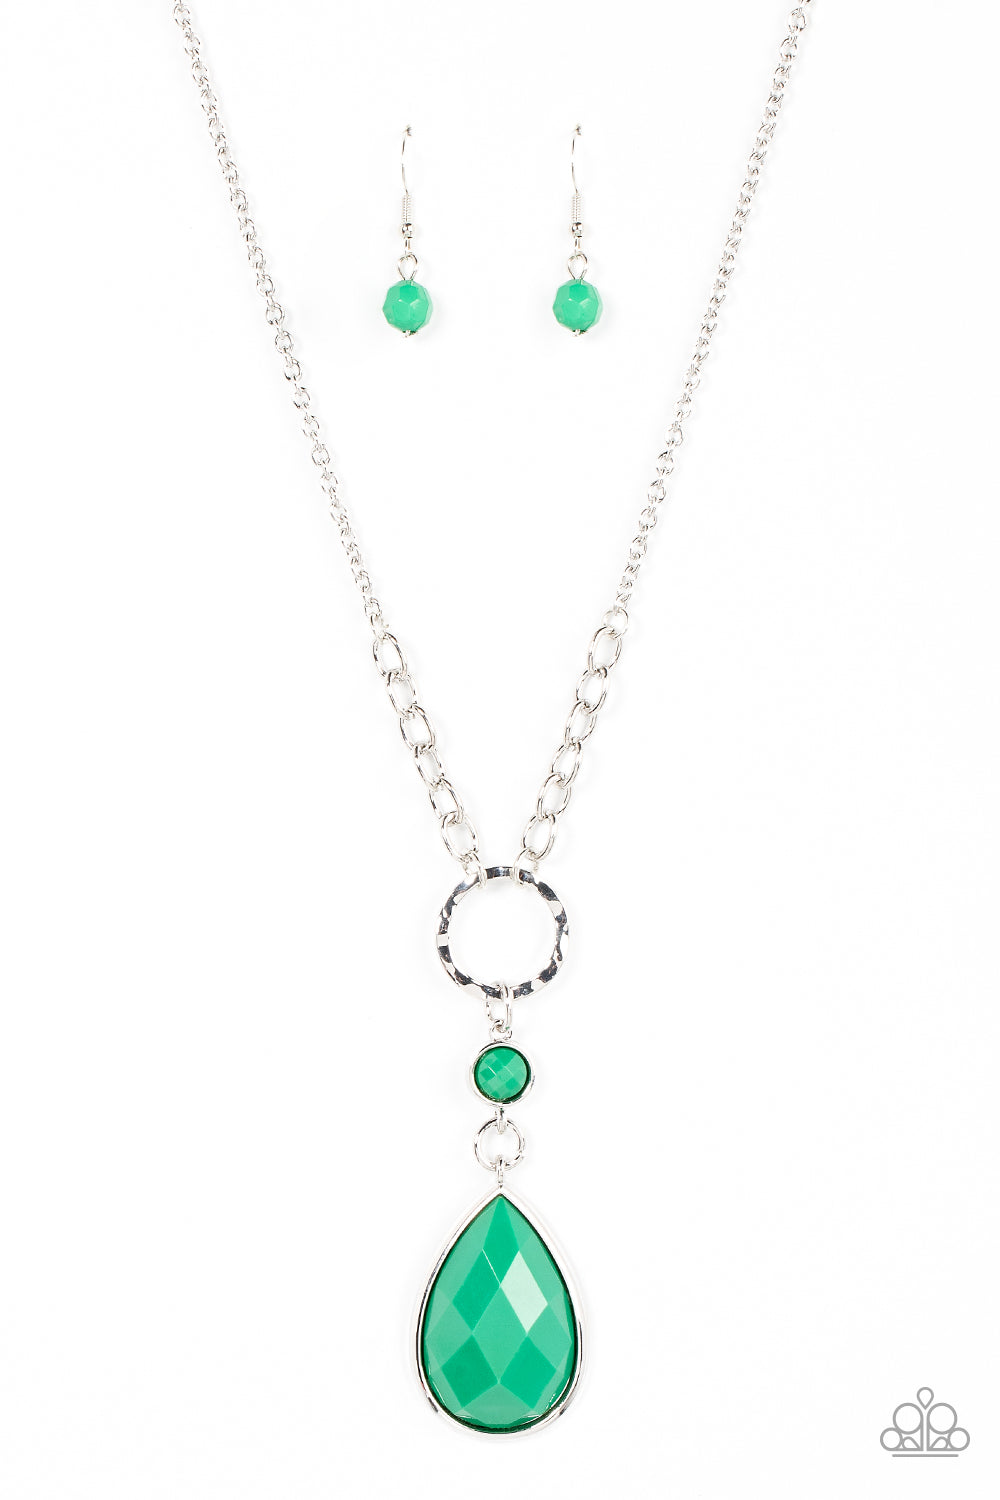 Valley Girl Glamour - Green Necklace Paparazzi